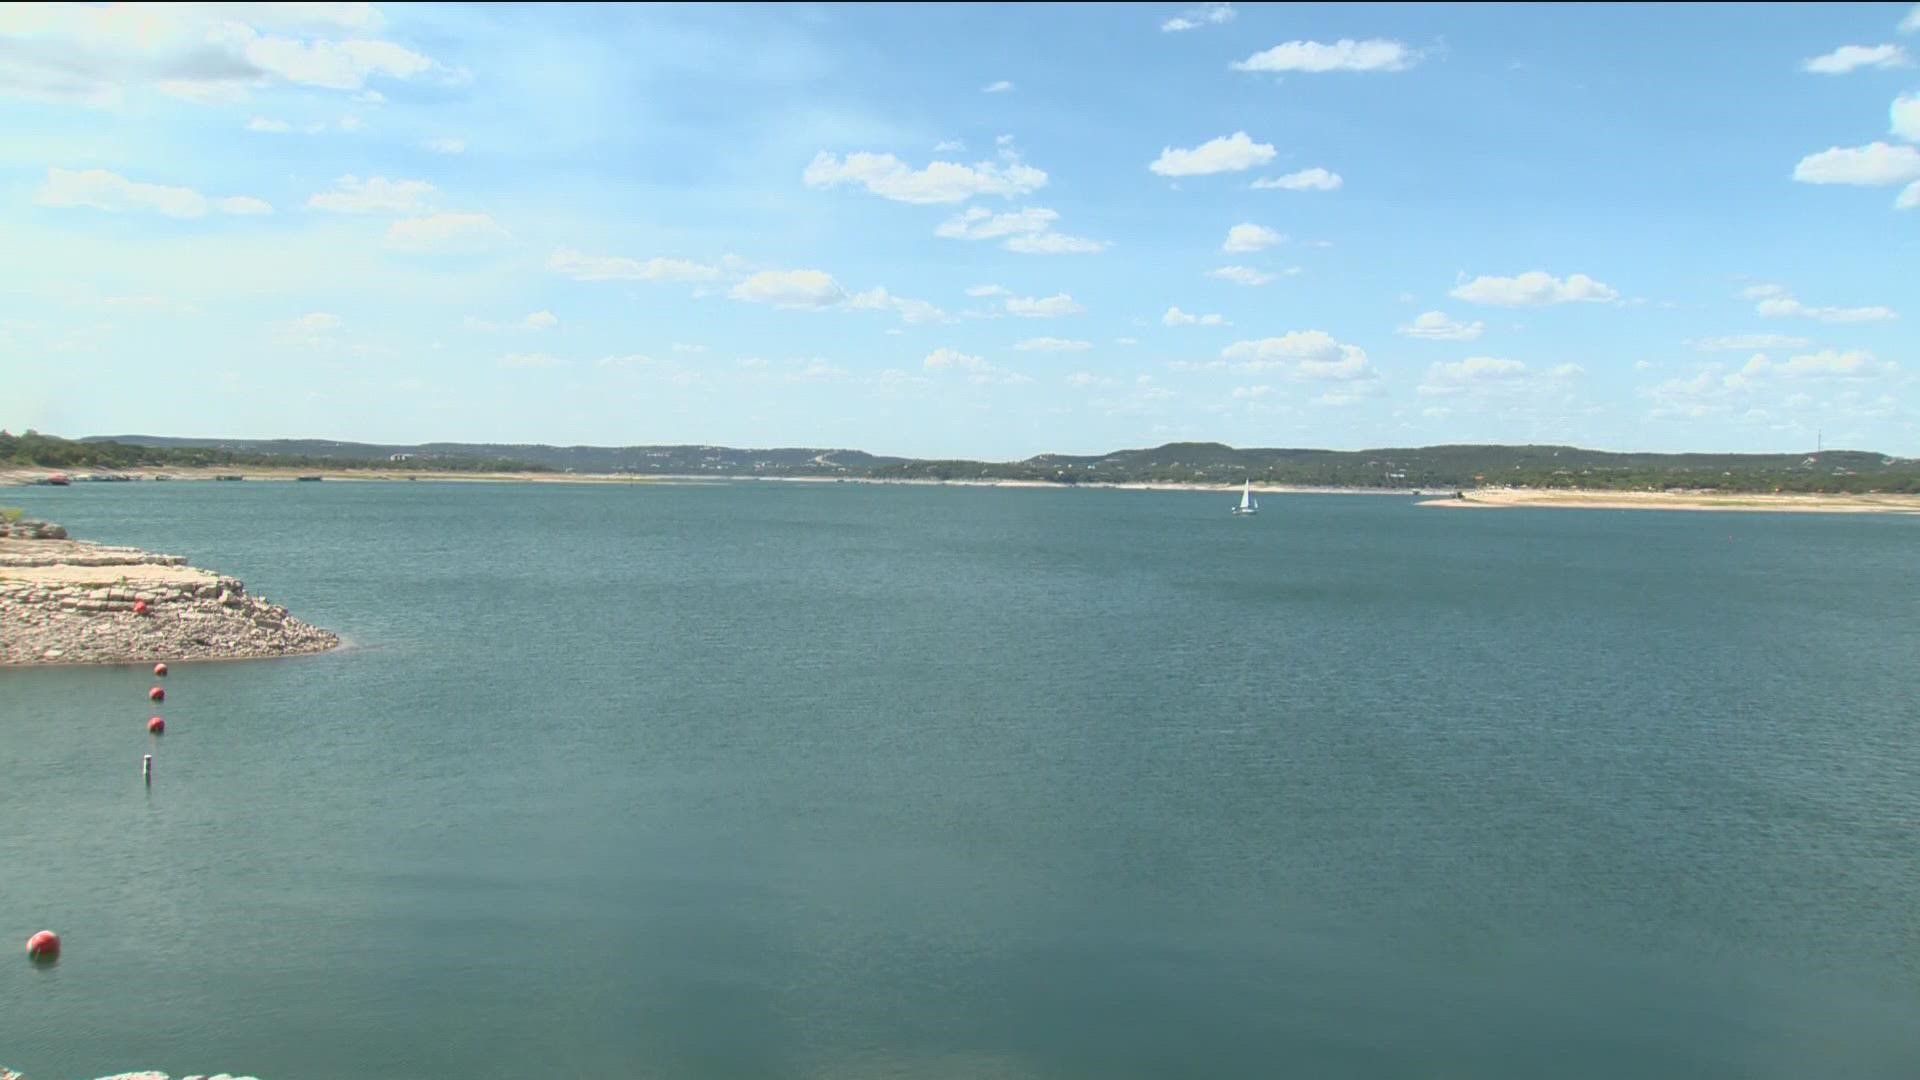 Water advocates want to see regulators do more now to meet water demand as more people move to Central Texas and drought conditions linger.